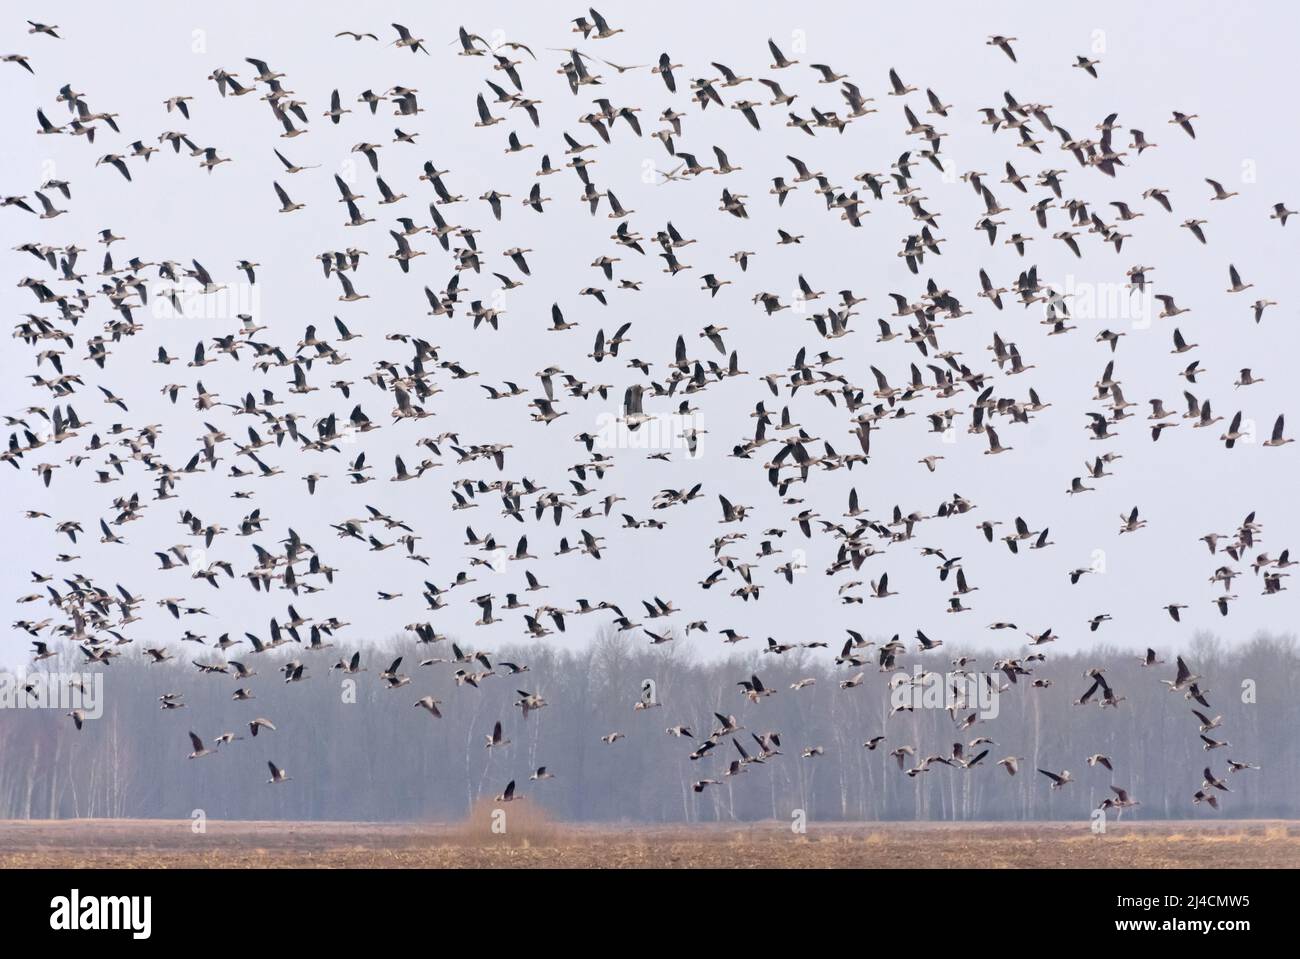 Large herd of Bean geese (Anser fabalis) and Greater White-fronted Geese (Anser albifrons) in flight over trees near the field in spring Stock Photo